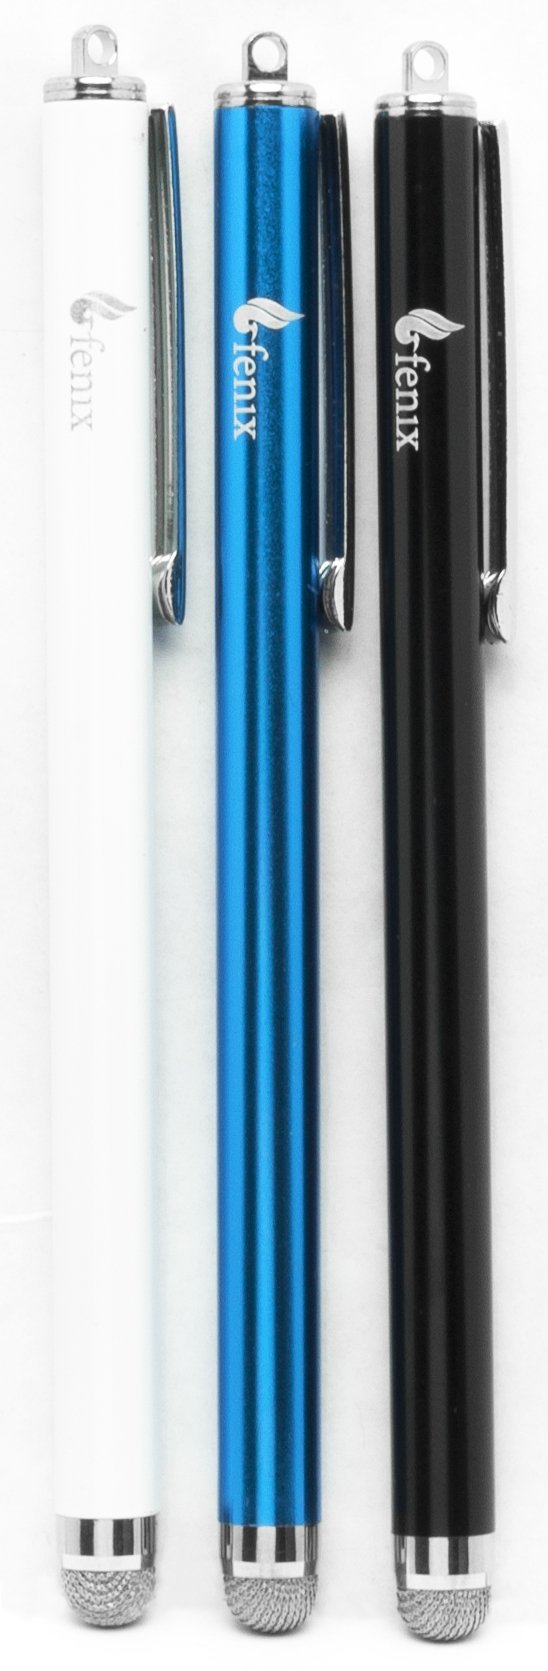 Fenix - Set of 3 [Black, Blue, White] Stylus Pen with Micro Knit Hybrid Fiber Tip for iPhone 4/5/5c/6/6+, iPad/iPad Air/iPad Mini, Samsung Galaxy S4/S5/S6/Edge, Kindle Fire, Surface Pro and More